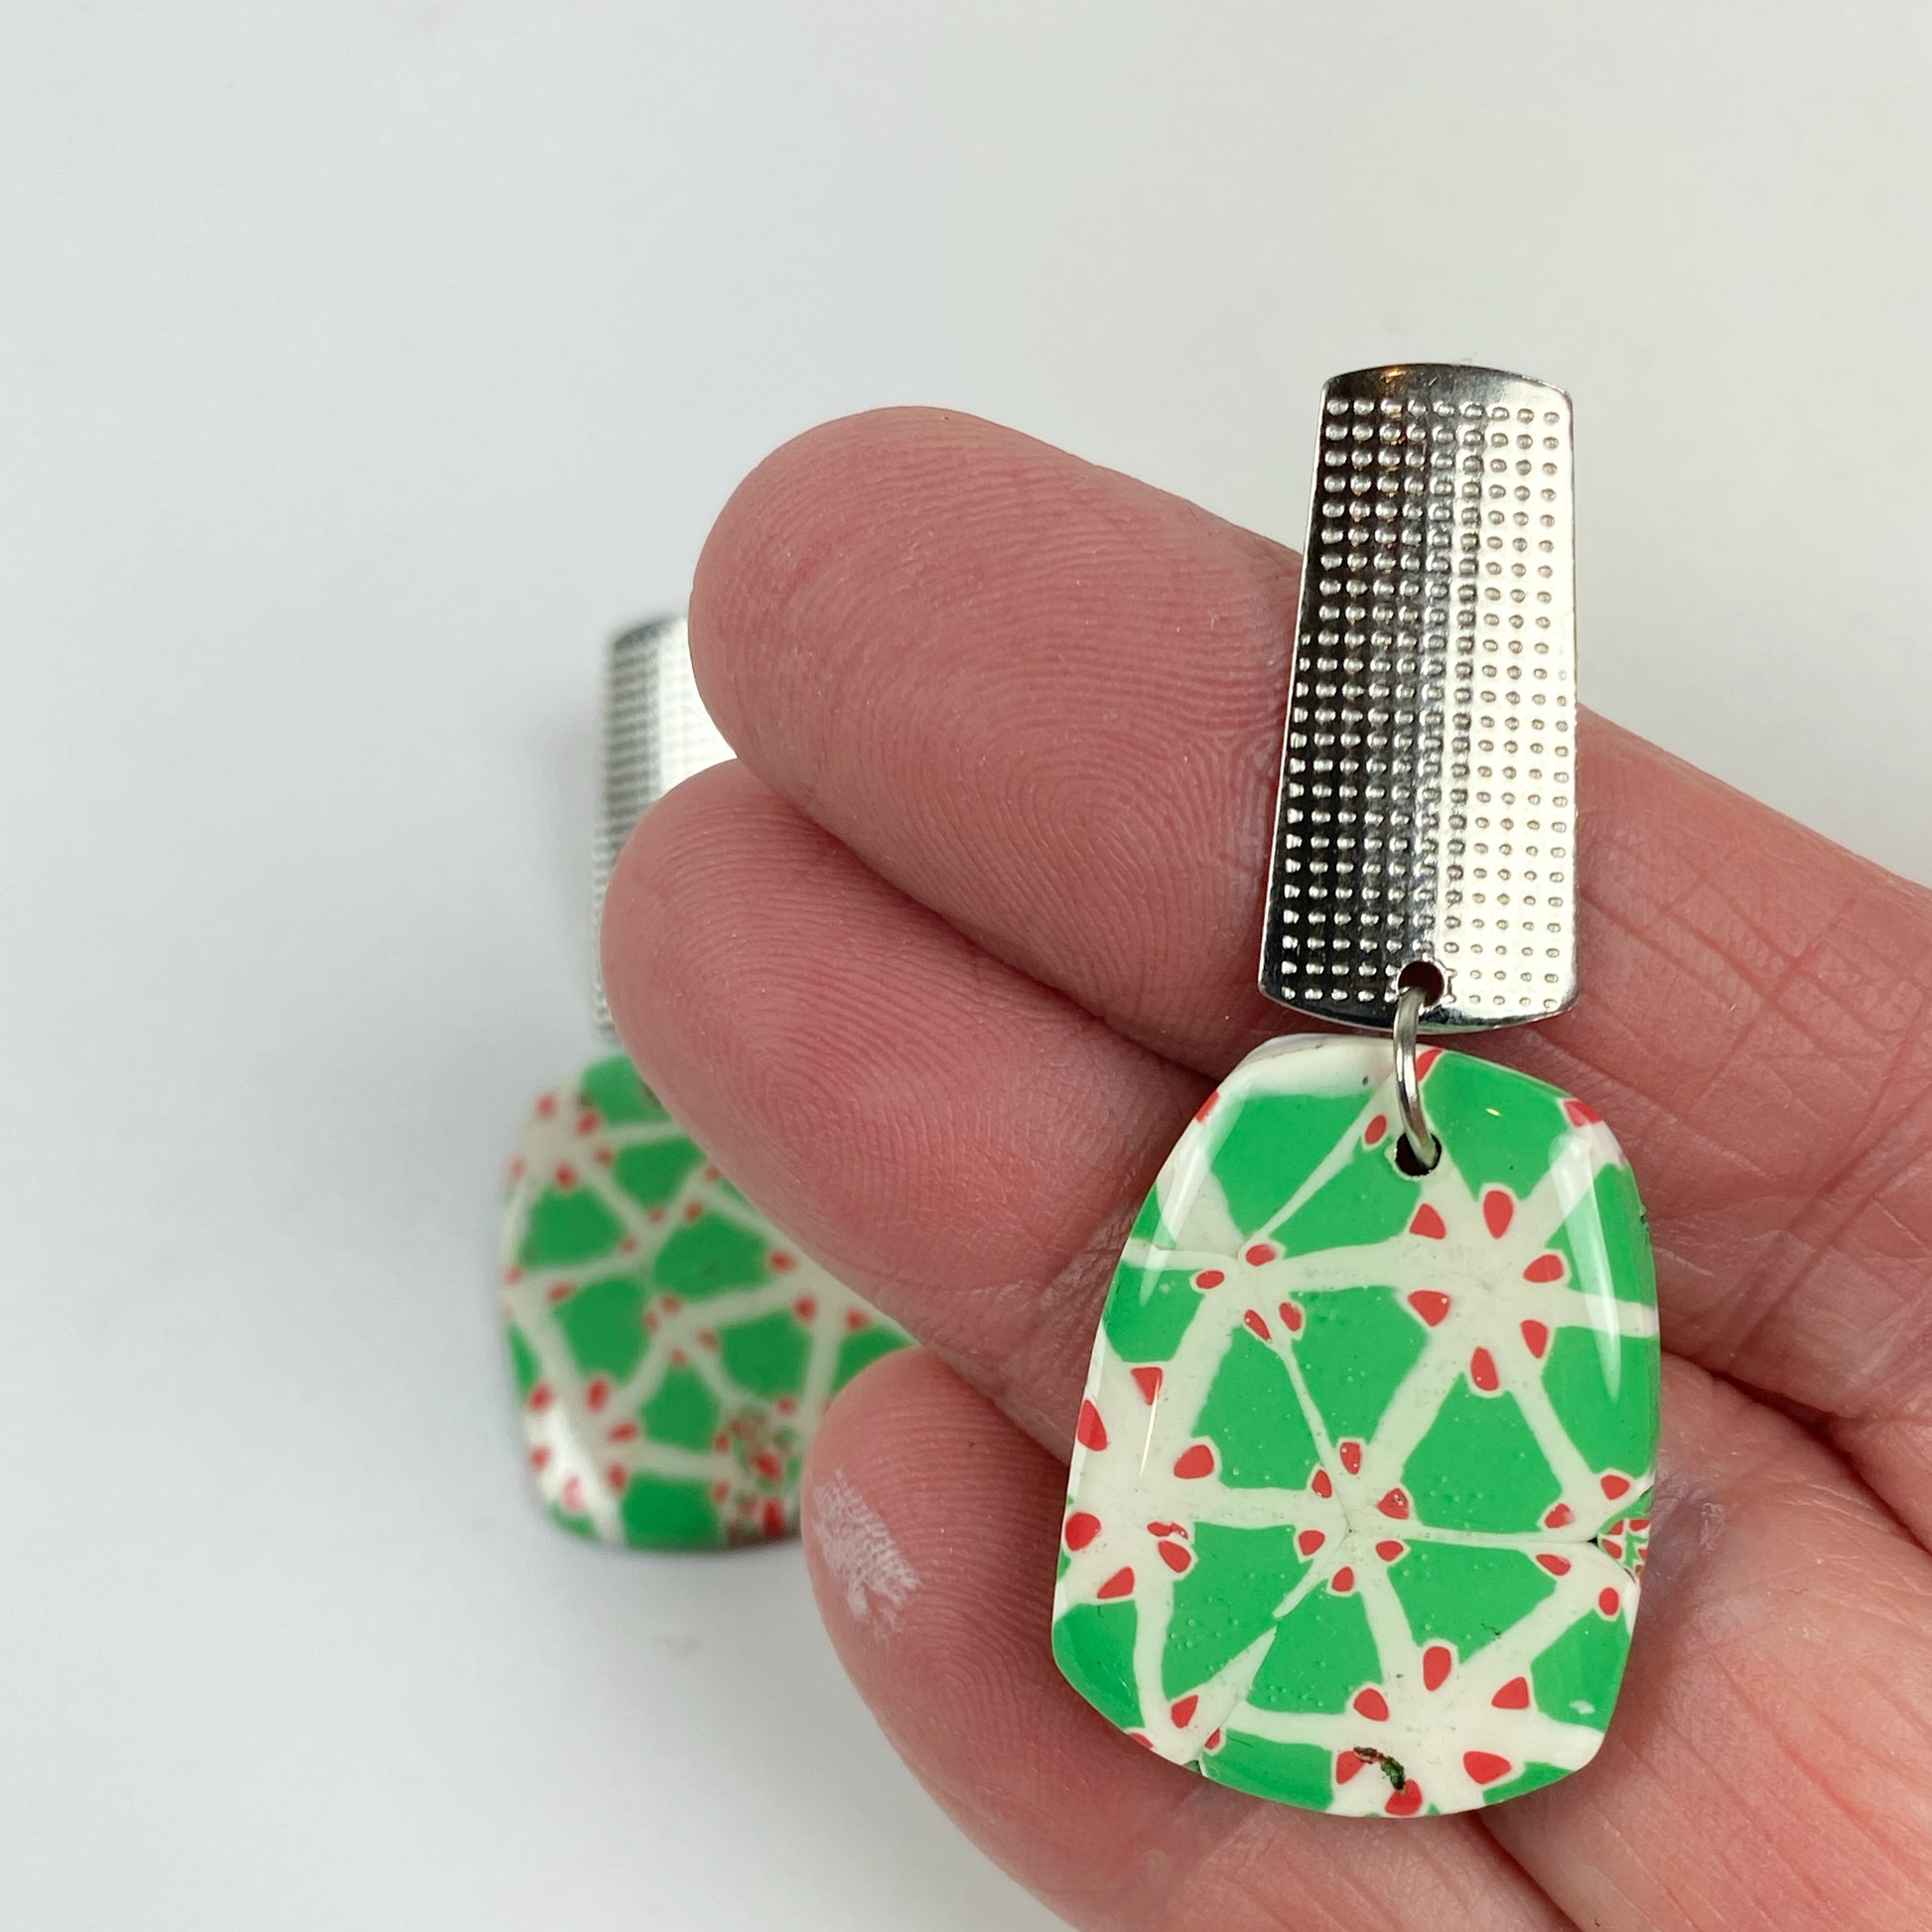 Garden Lattice Handmade Polymer Clay Dangle Earrings handheld for size reference